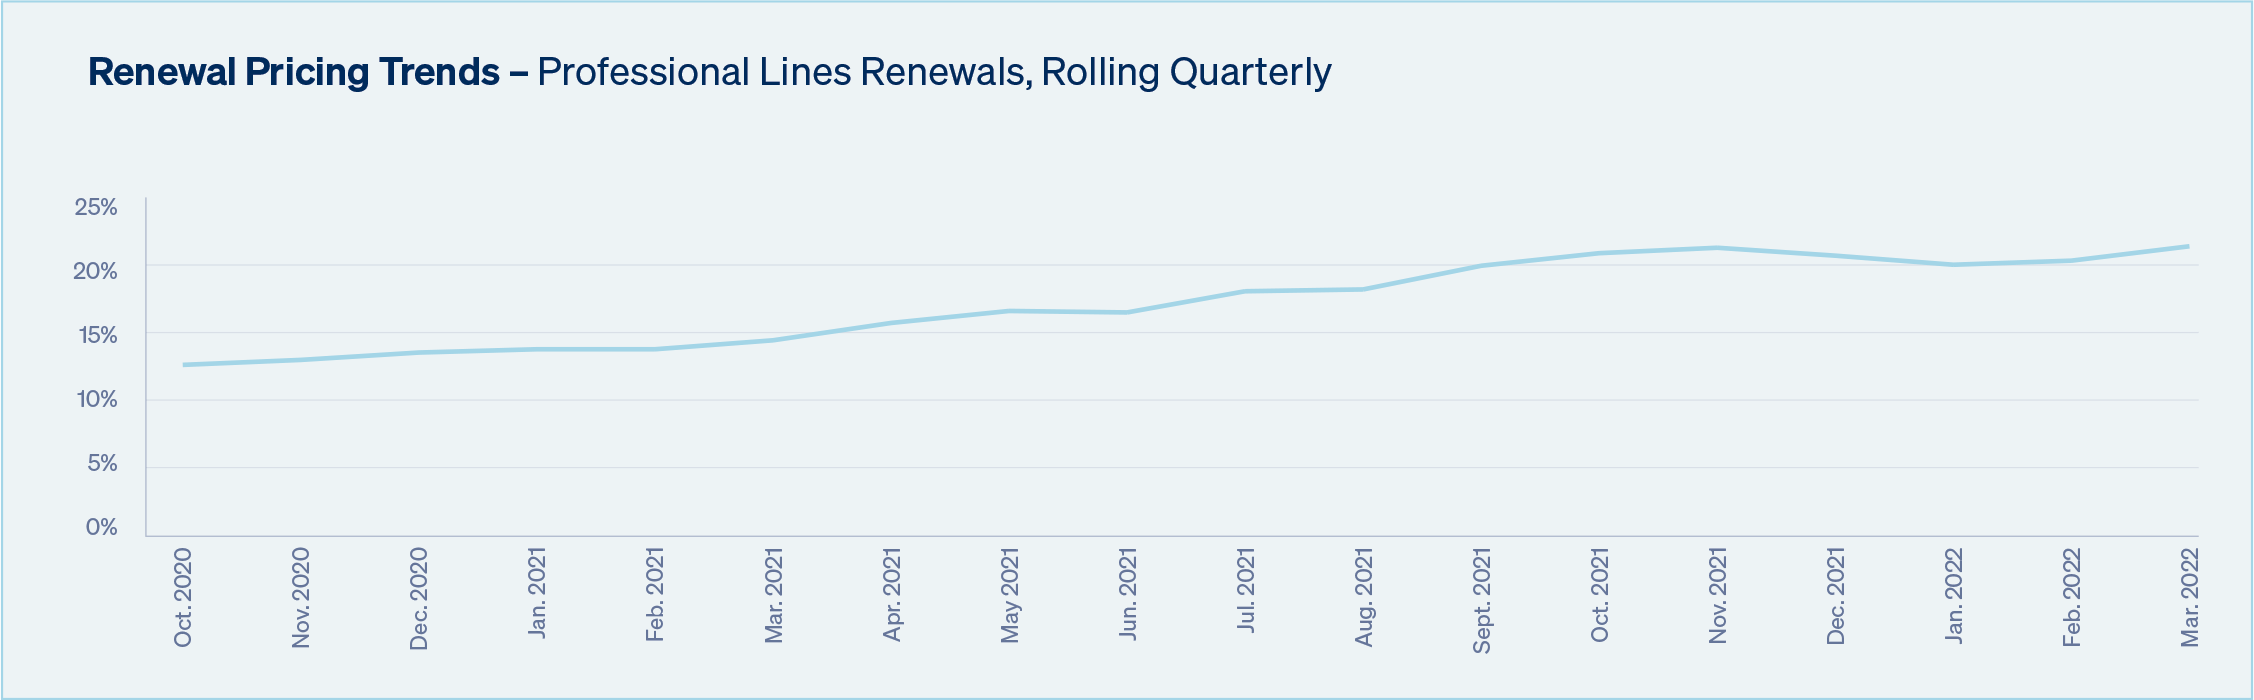 Professional Lines Renewals Oct. 2020 to Mar. 2022